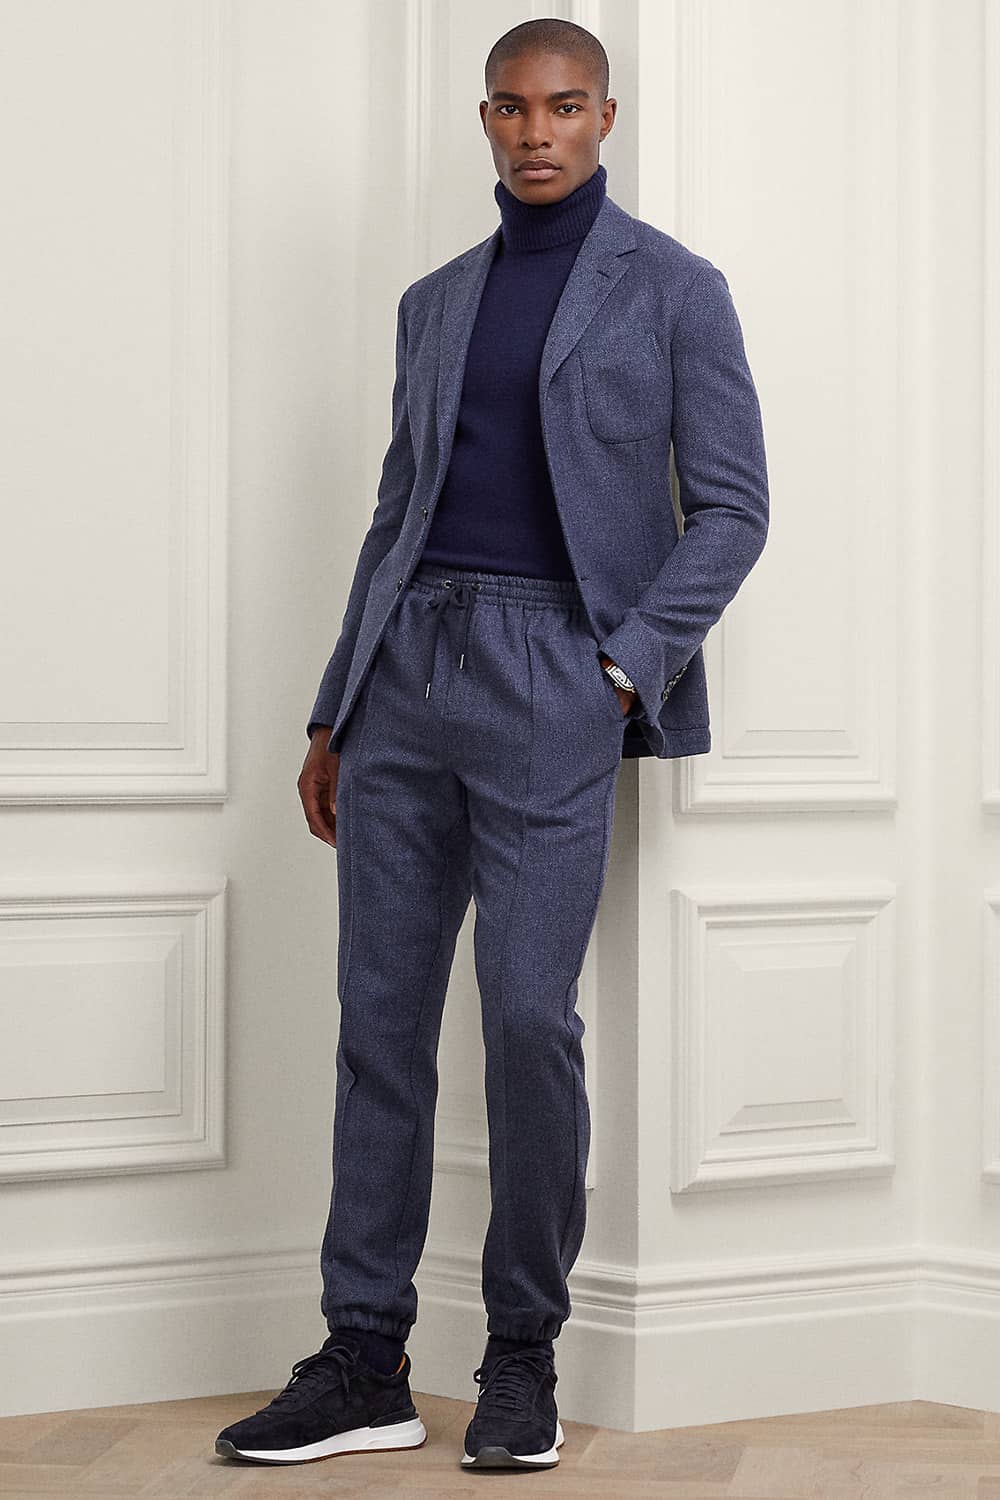 Suit With A Turtleneck: How To Get it Right In 2023 (19 Outfits)